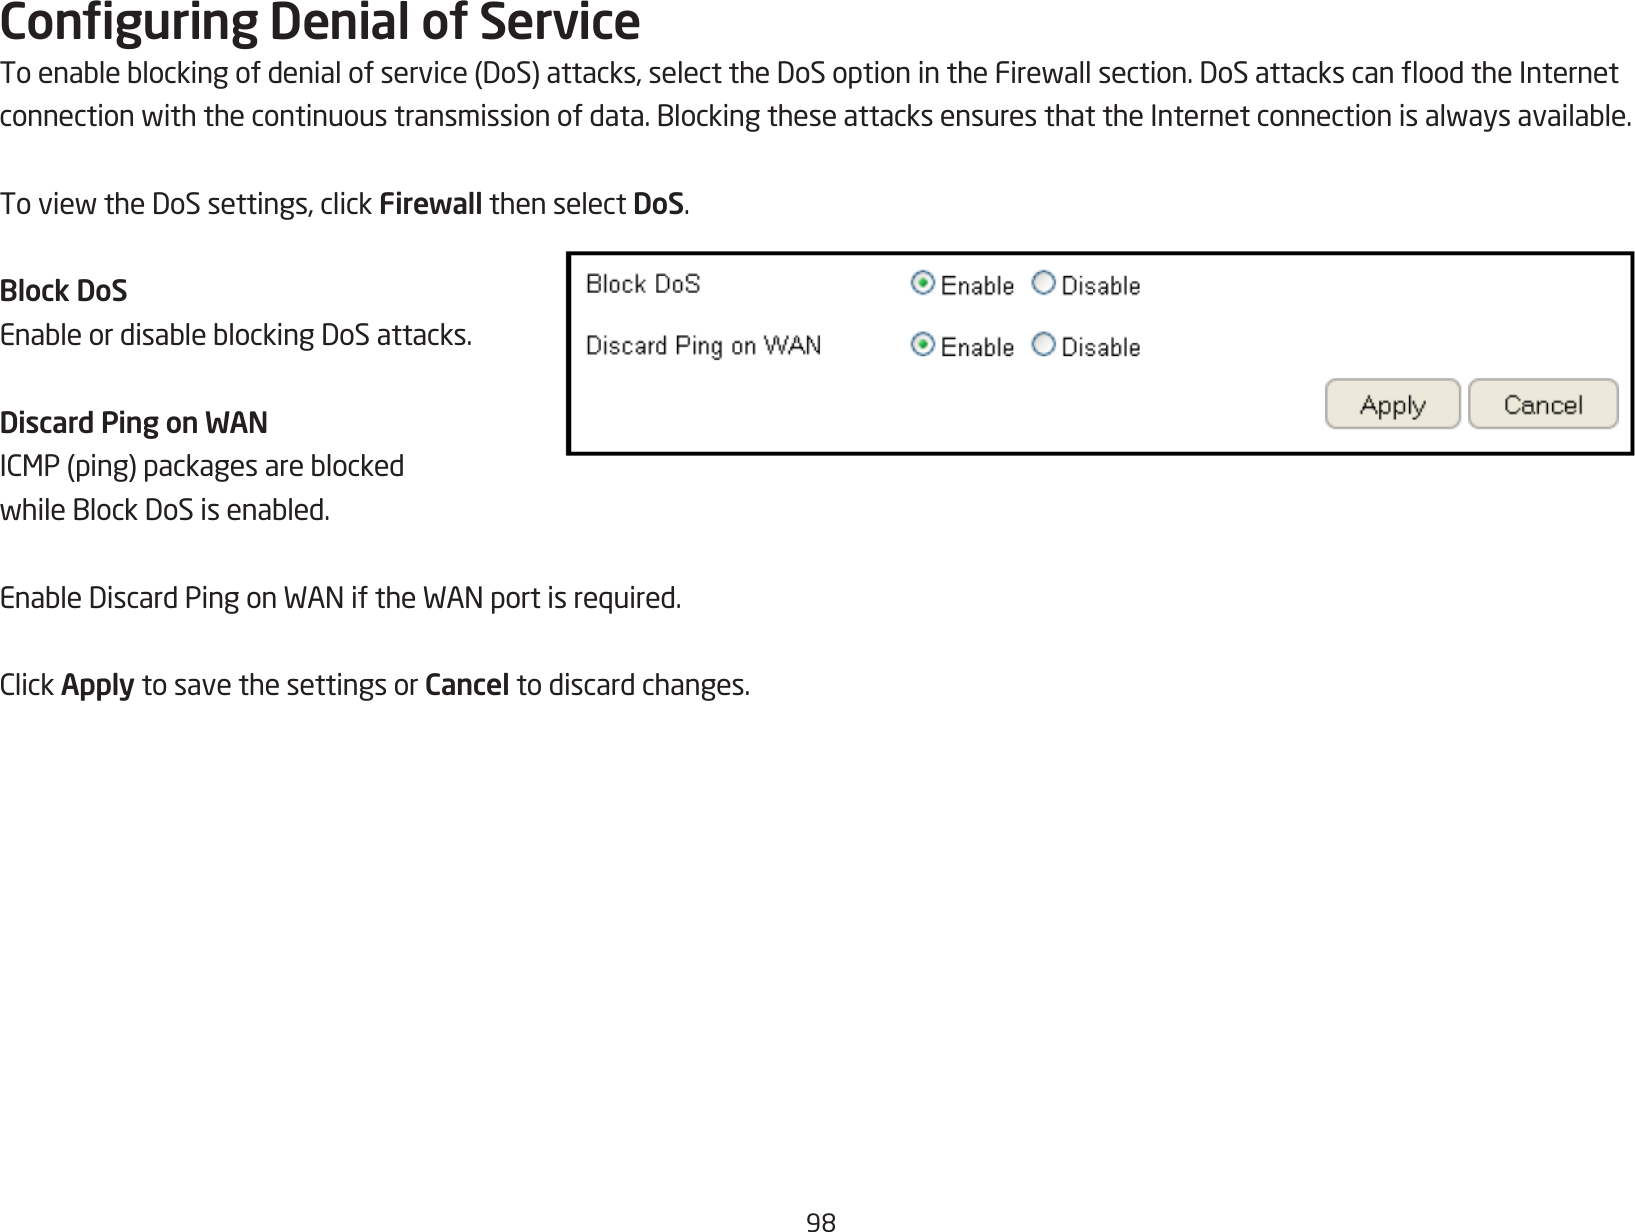 98Conguring Denial of ServiceToenableblockingofdenialofservice(DoS)attacks,selecttheDoSoptionintheFirewallsection.DoSattackscanoodtheInternetconnectionwiththecontinuoustransmissionofdata.BlockingtheseattacksensuresthattheInternetconnectionisalwaysavailable.ToviewtheDoSsettings,clickFirewall then select DoS.Block DoSEnableordisableblockingDoSattacks.Discard Ping on WANICMP(ping)packagesareblockedwhileBlockDoSisenabled.EnableDiscardPingonWANiftheWANportisrequired.ClickApply to save the settings or Cancel to discard changes.